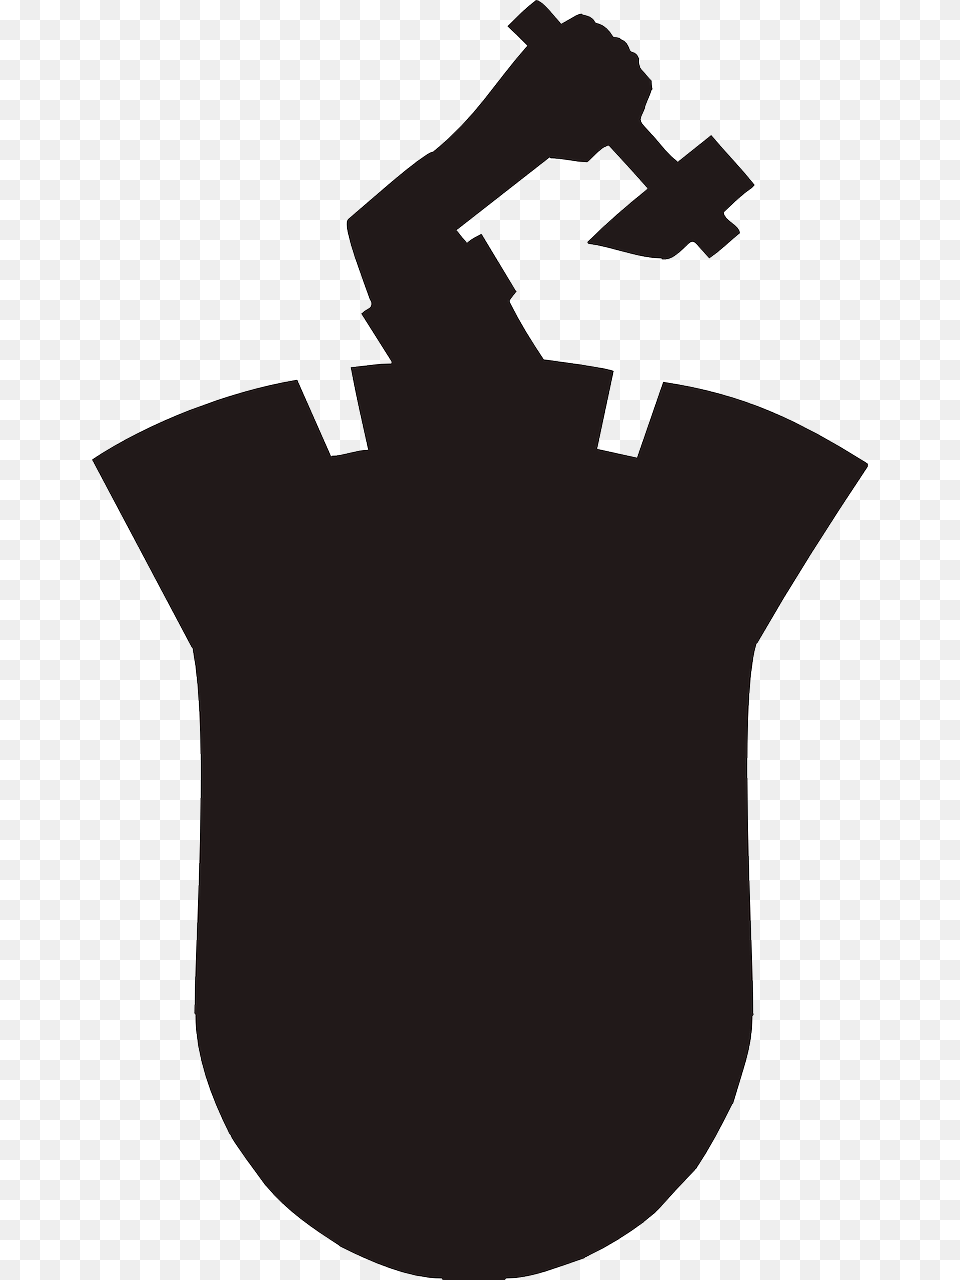 Black Hand Silhouette Axe Labor Worker Employee Texas State Tree, Stencil Png Image